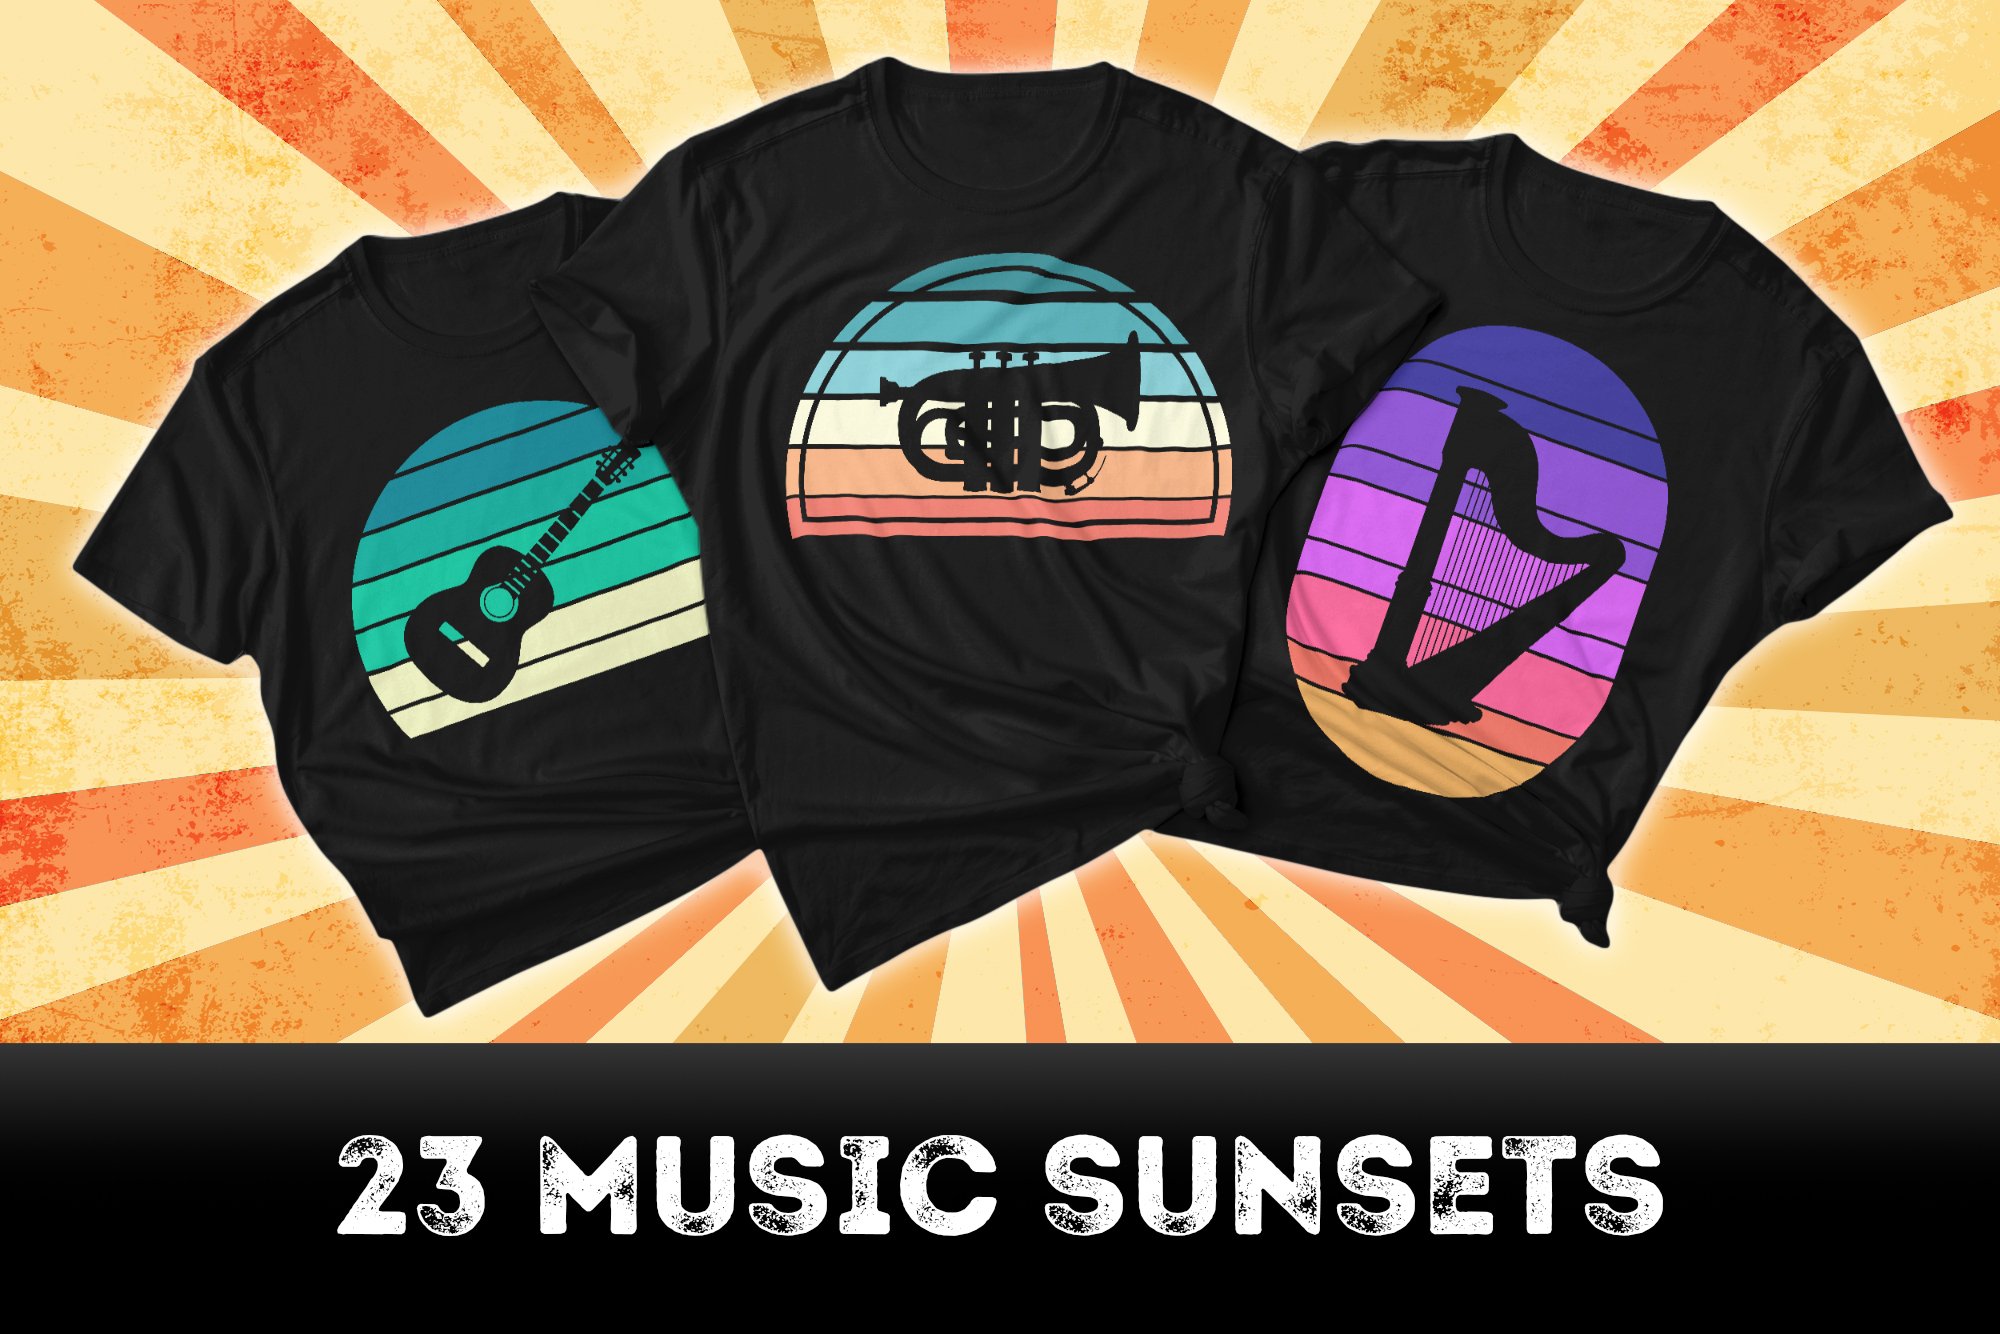 23 Print on Demand Music Sunsets SVG cover image.